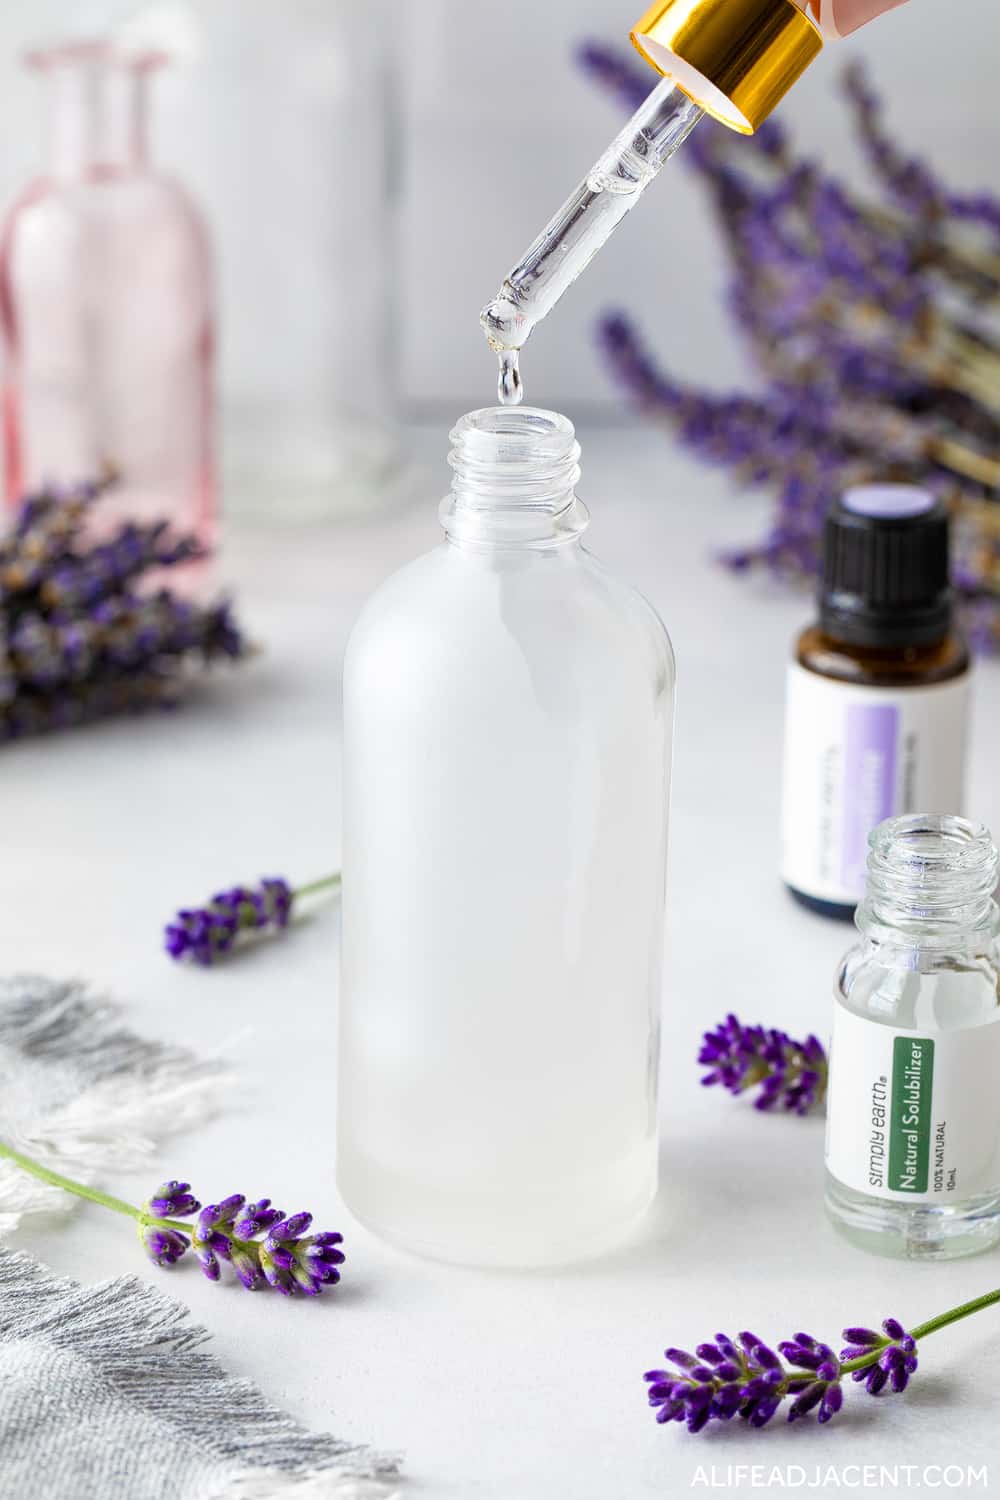 Adding natural solubilizer to pillow spray bottle